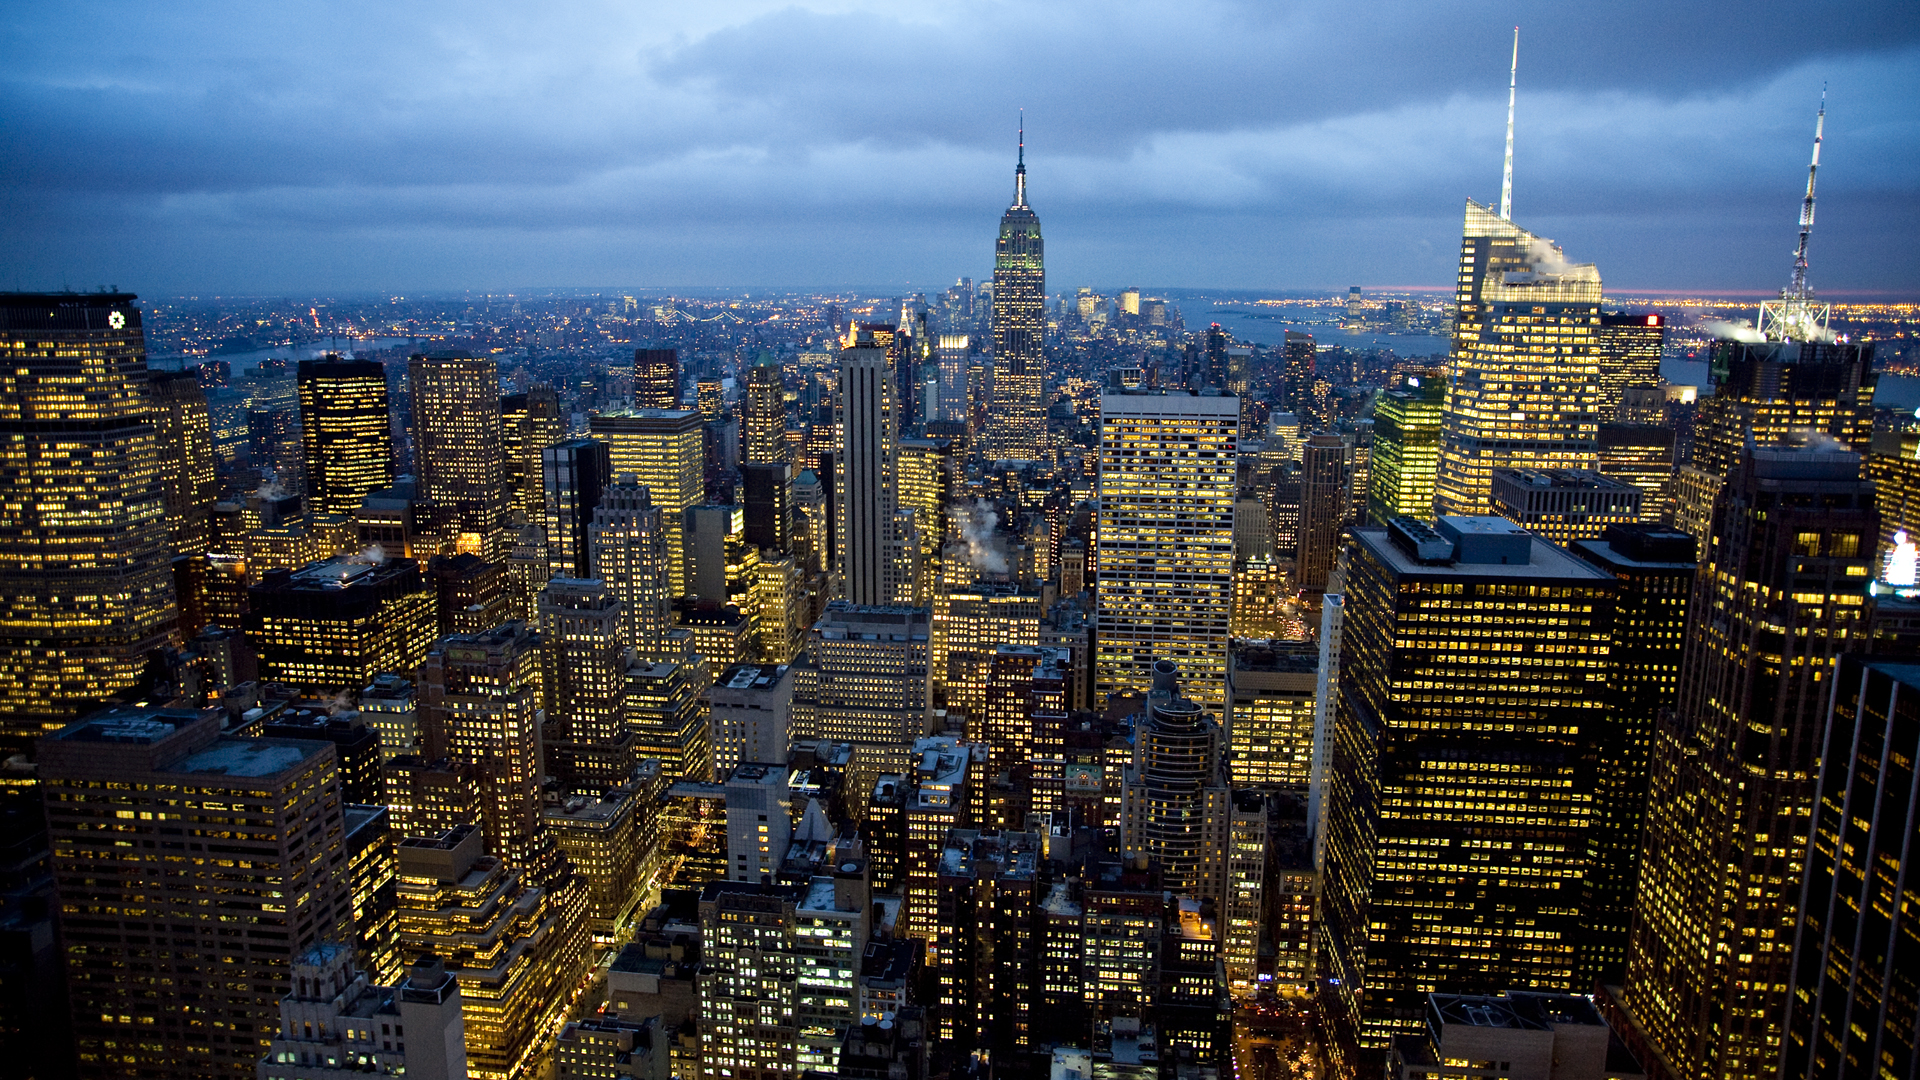 clouds, cityscapes, lights, New York City, skyscrapers - desktop wallpaper